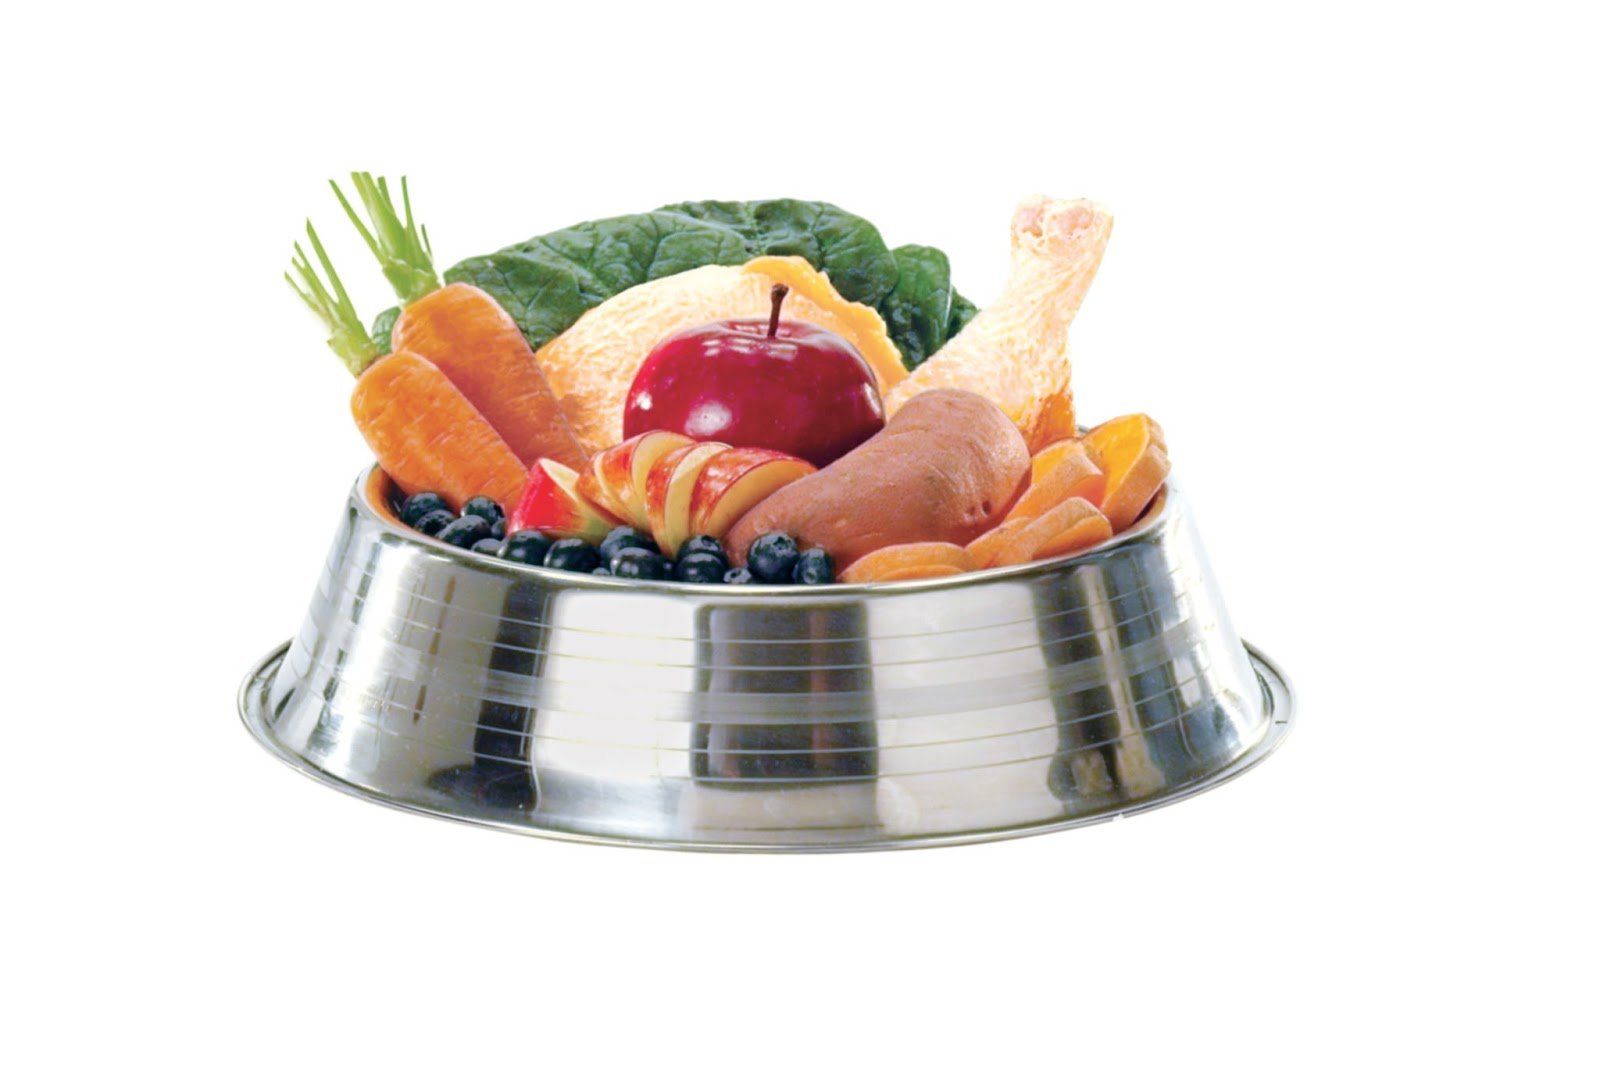 Tips On How To Make a Healthy Dog Food